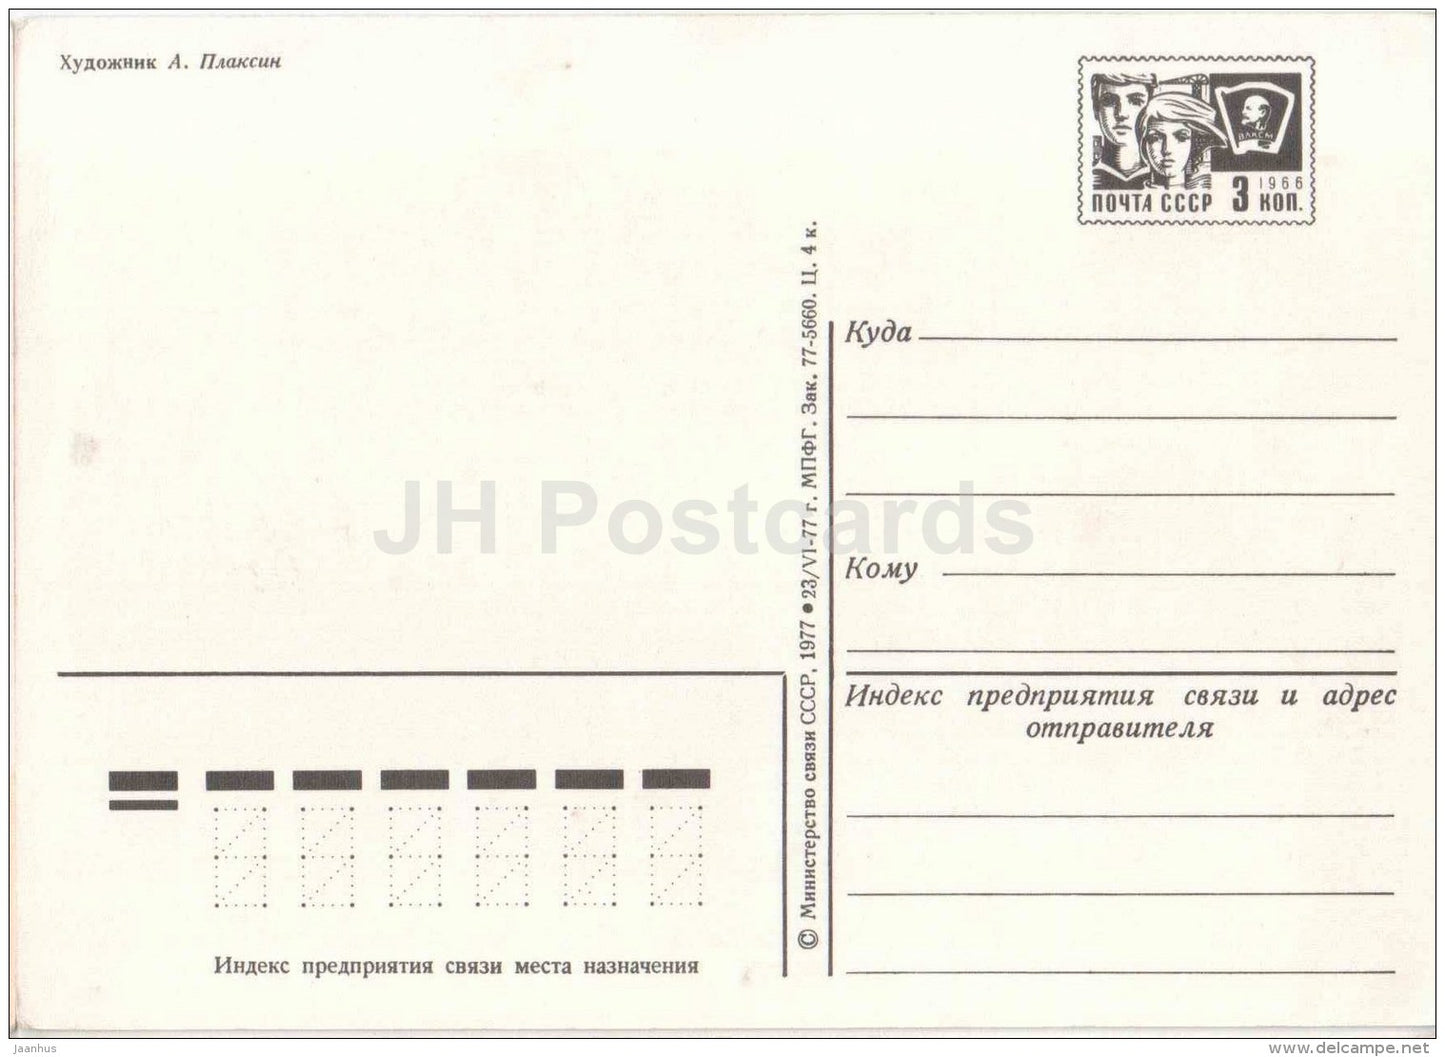 8 March International Women's Day greeting card - tulips in the basket - postal stationery - 1977 - Russia USSR - unused - JH Postcards